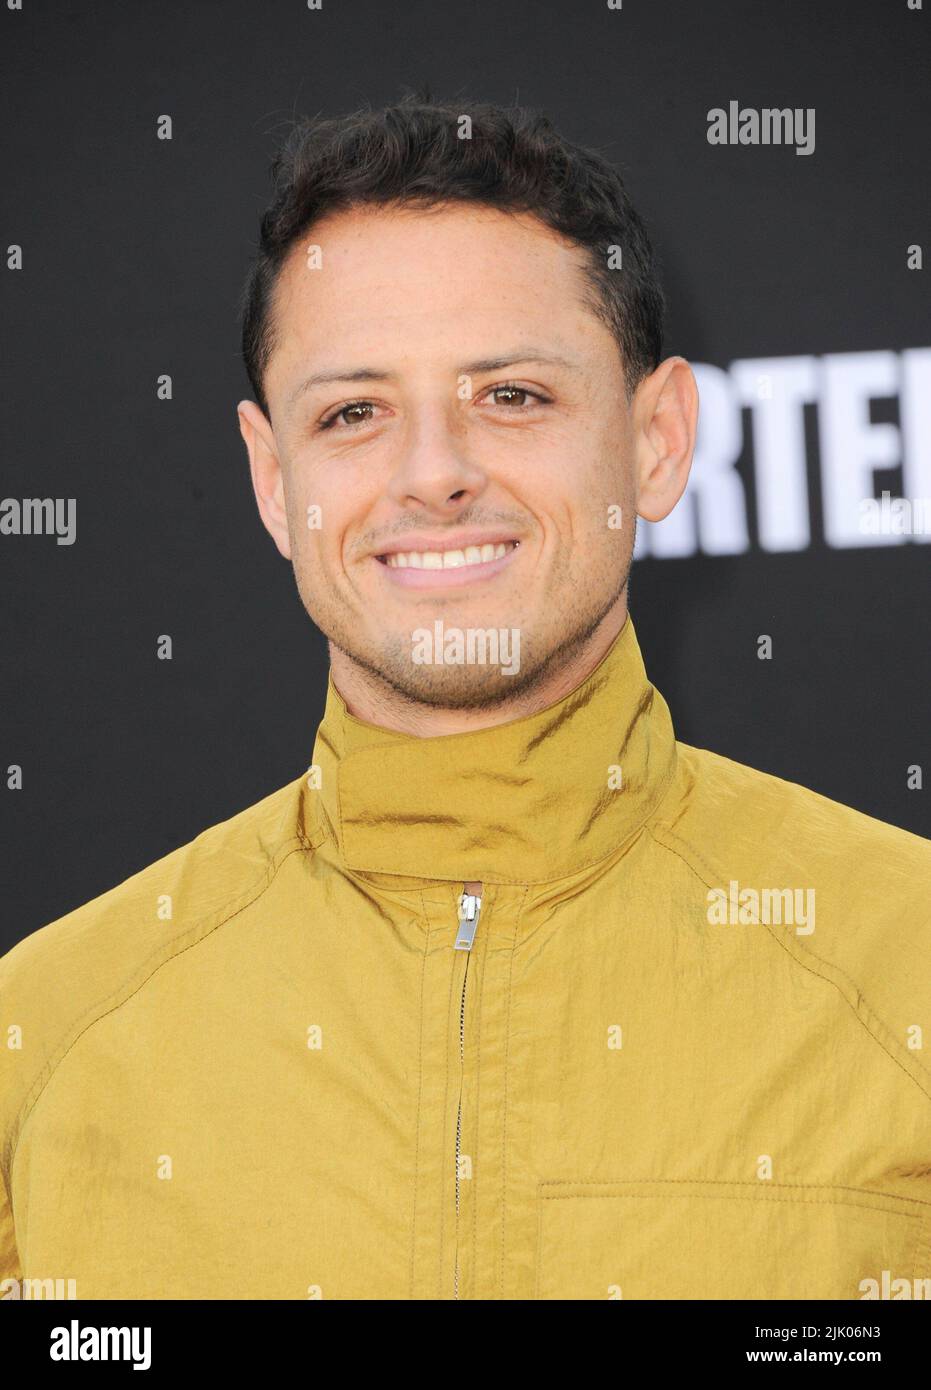 Los Angeles, CA. 28th July, 2022. Javier Hernández aka Chicharito at arrivals for THIRTEEN LIVES Premiere, Westwood Village Theater, Los Angeles, CA July 28, 2022. Credit: Elizabeth Goodenough/Everett Collection/Alamy Live News Stock Photo